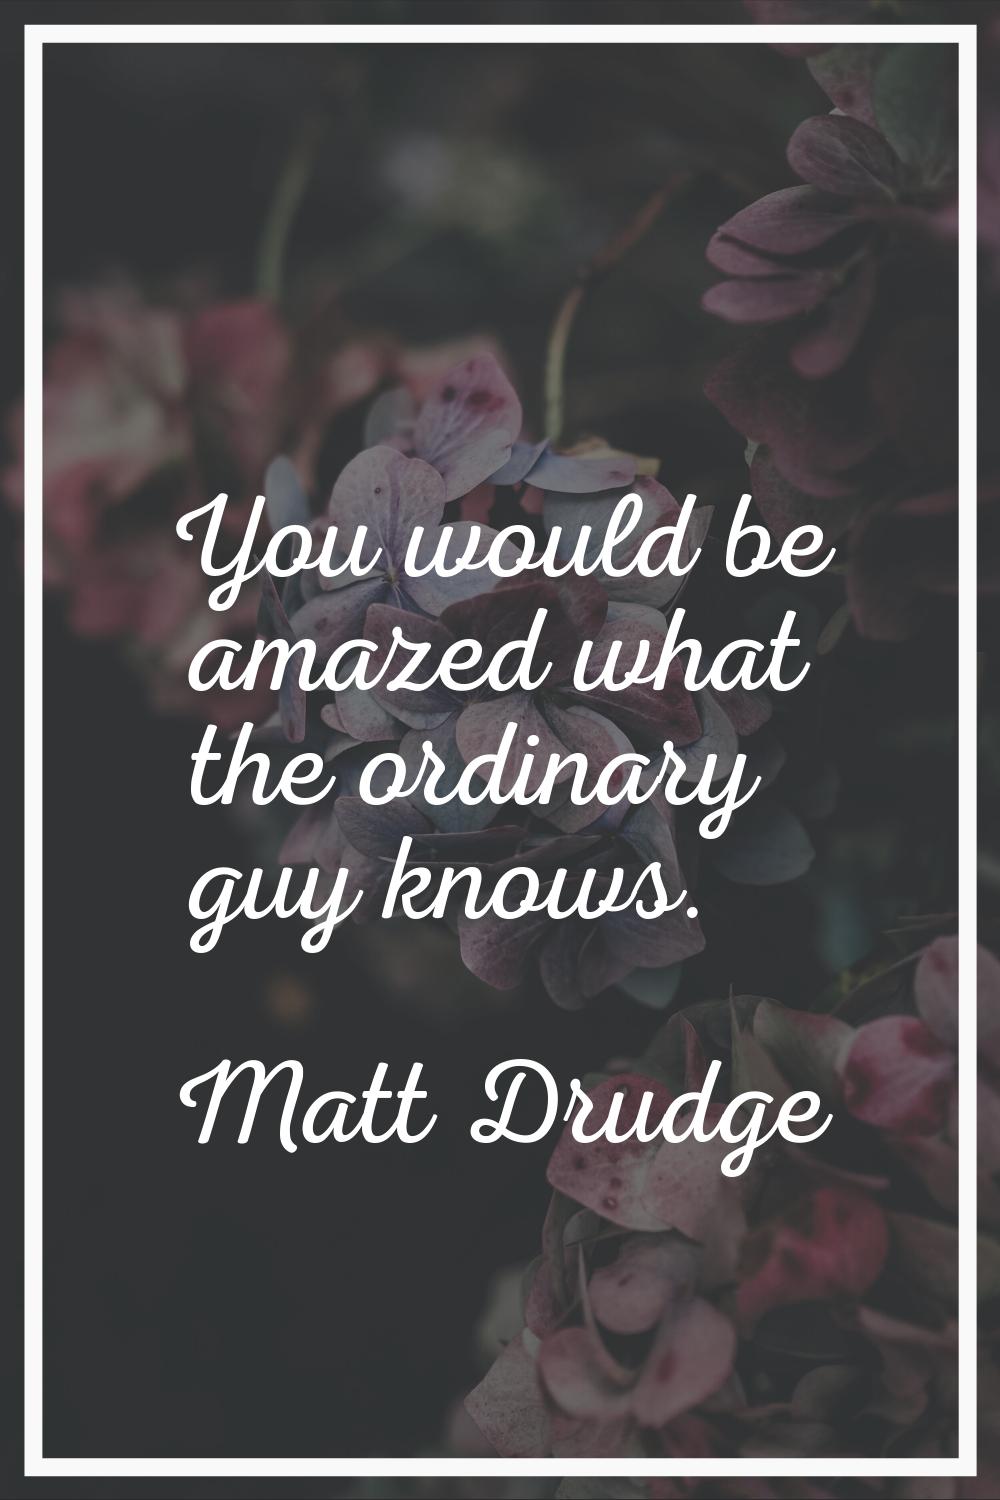 You would be amazed what the ordinary guy knows.